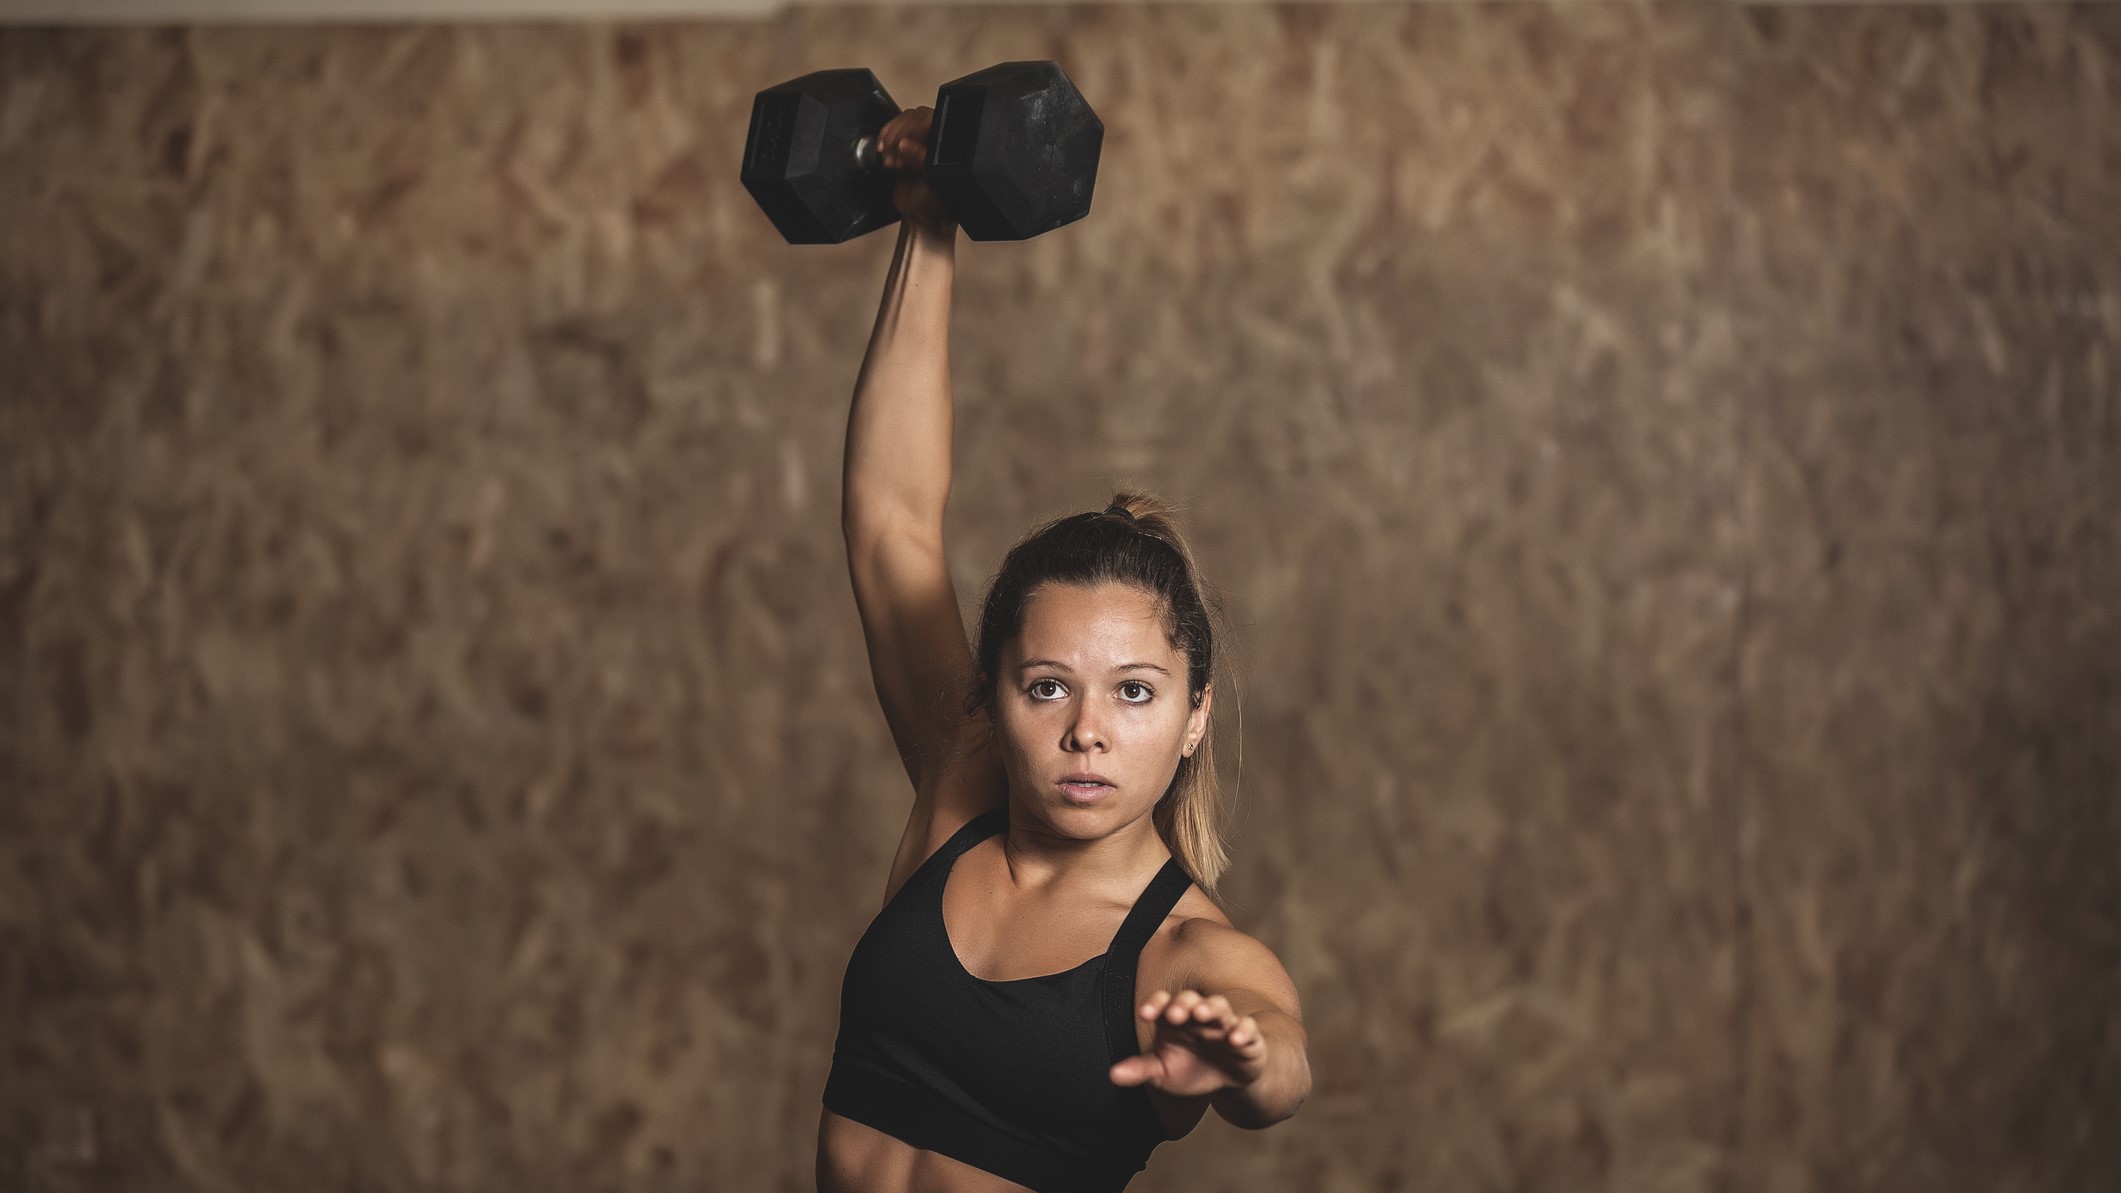 Forget push-ups — this 10-minute arm workout sculpts your biceps